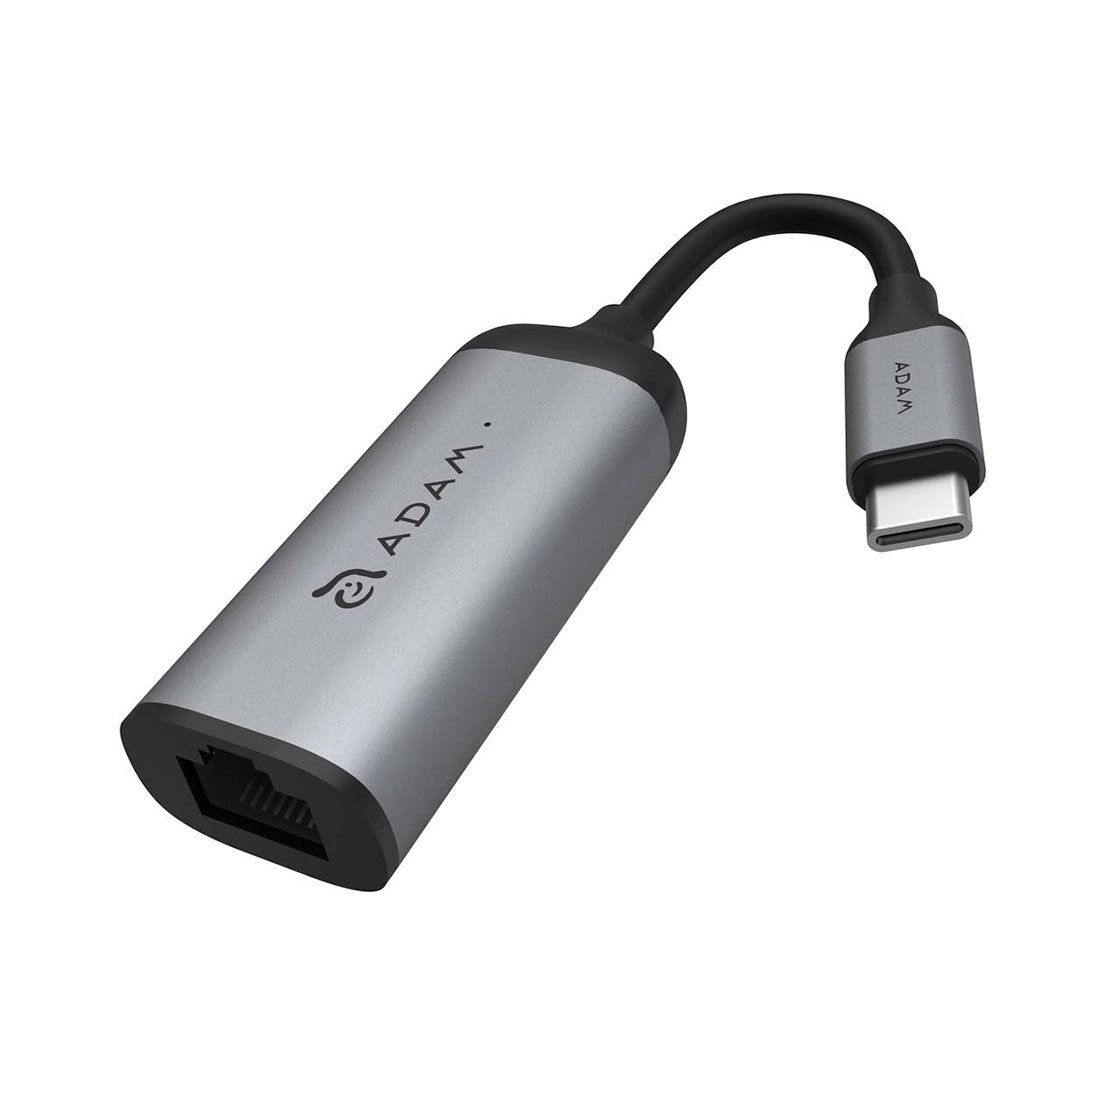 Adam Elements USB-C to Ethernet Adapter - Space Grey